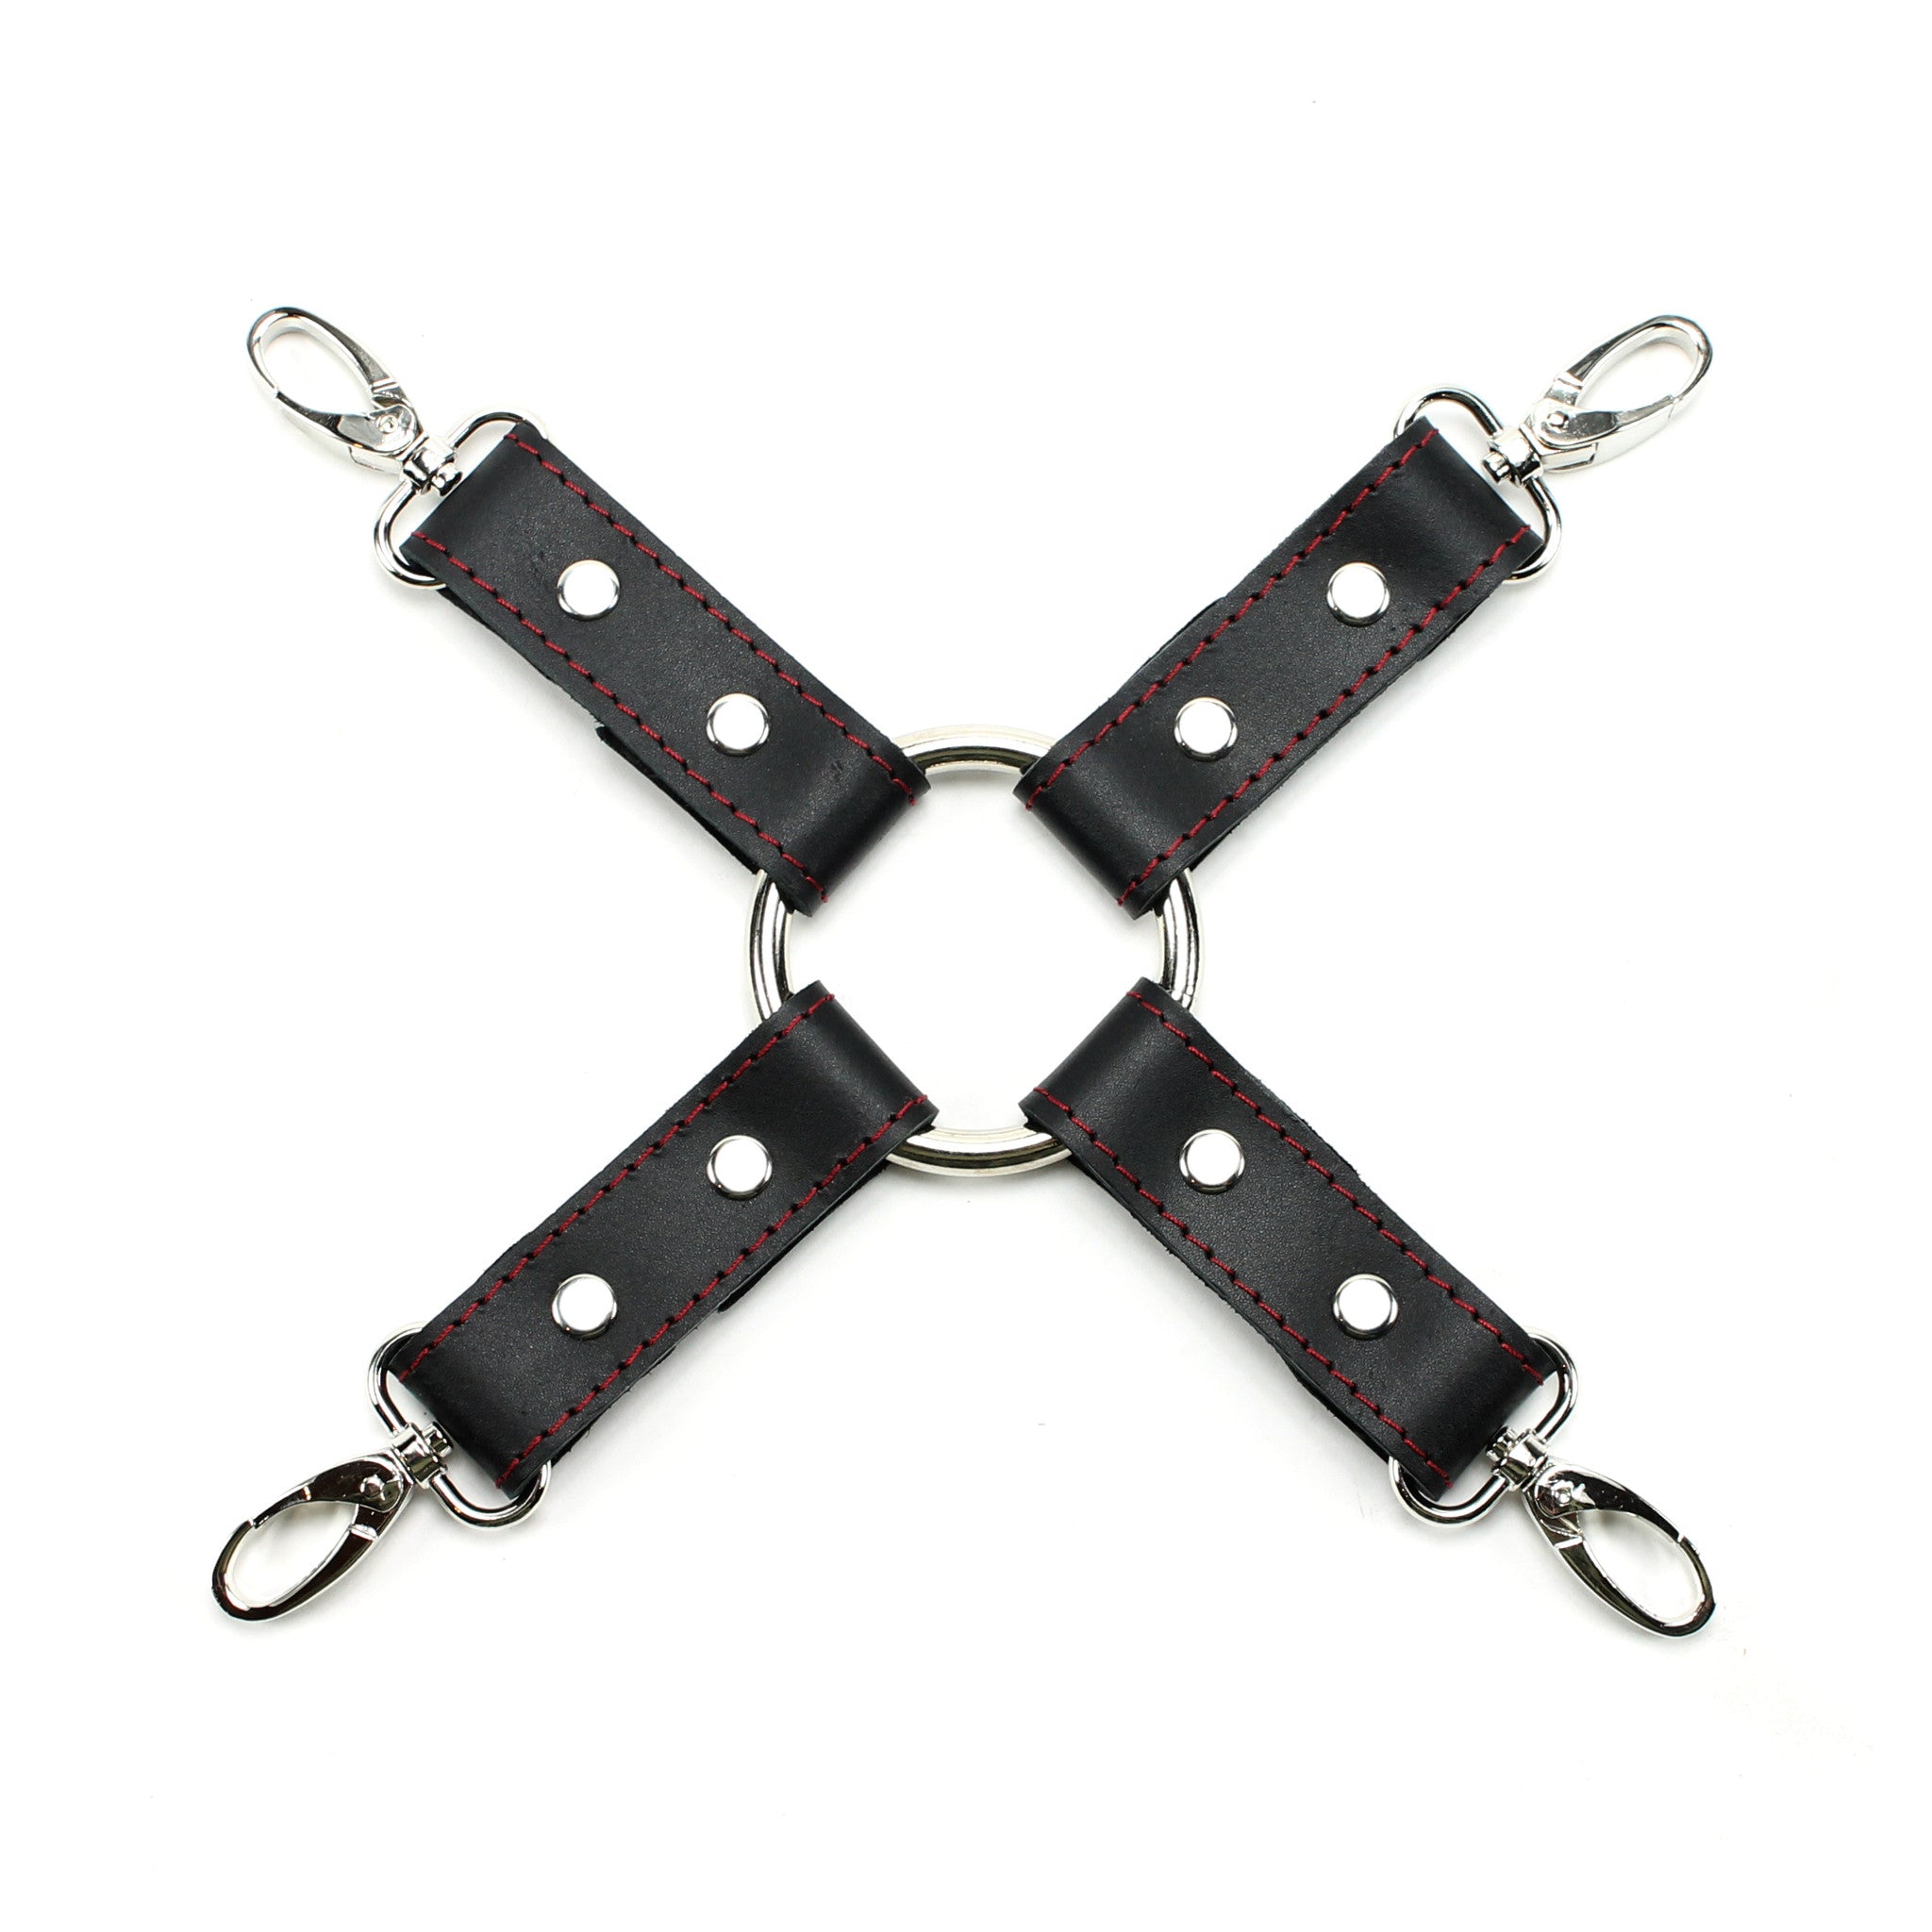 Red and black leather 4-point bondage hogtie